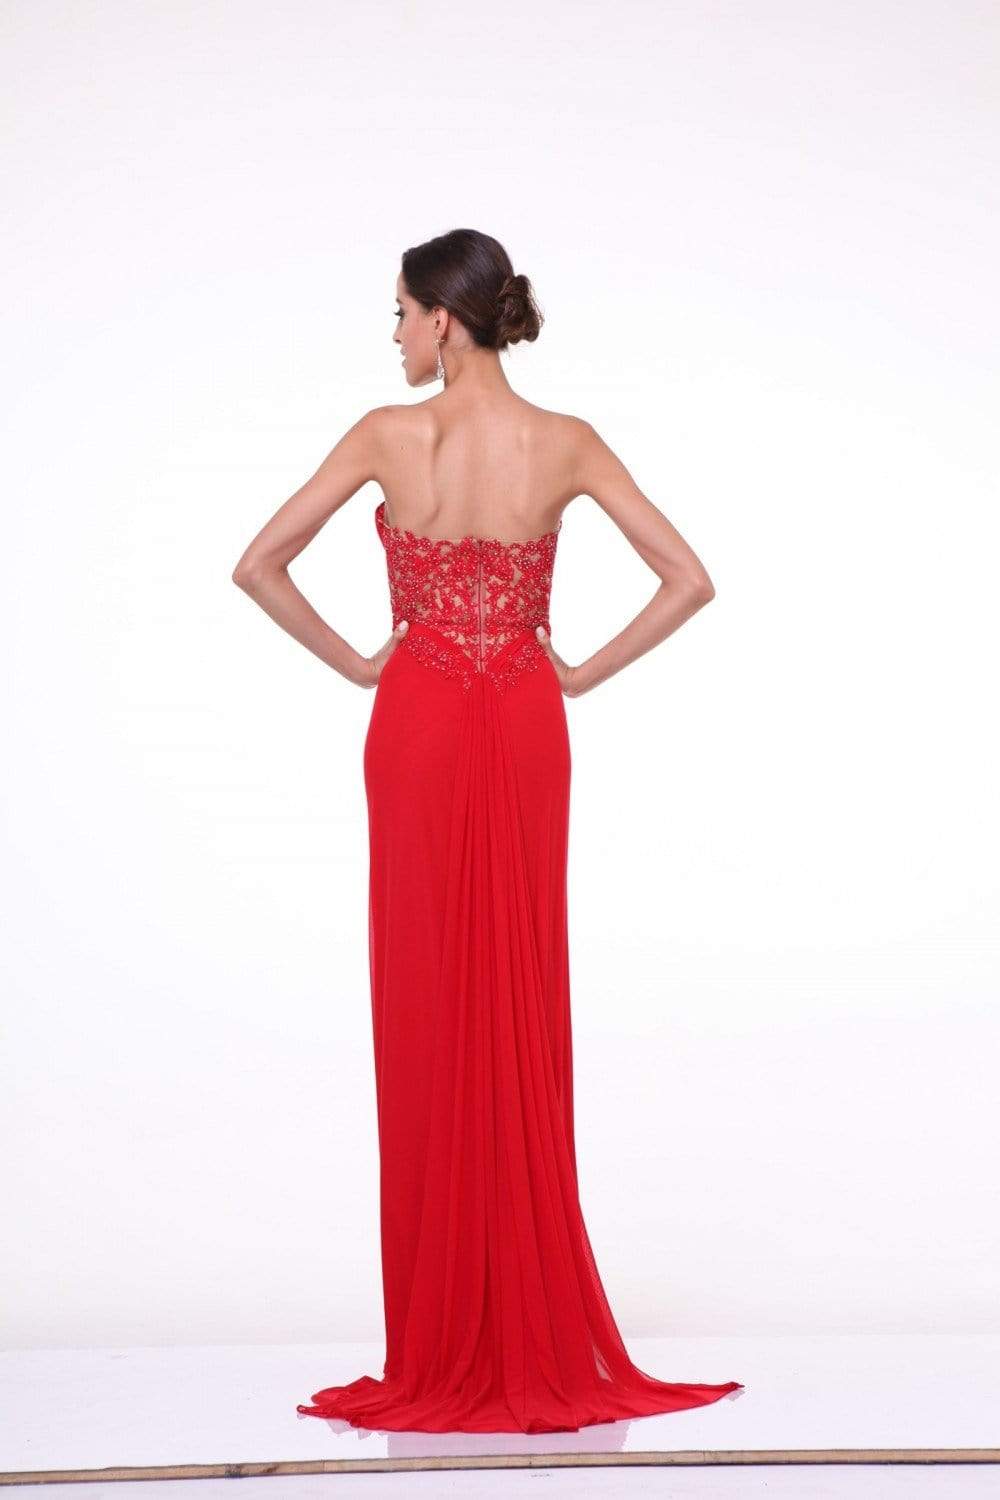 Cinderella Divine - Crisscrossed Strapless Applique Ornate Long Gown Special Occasion Dress